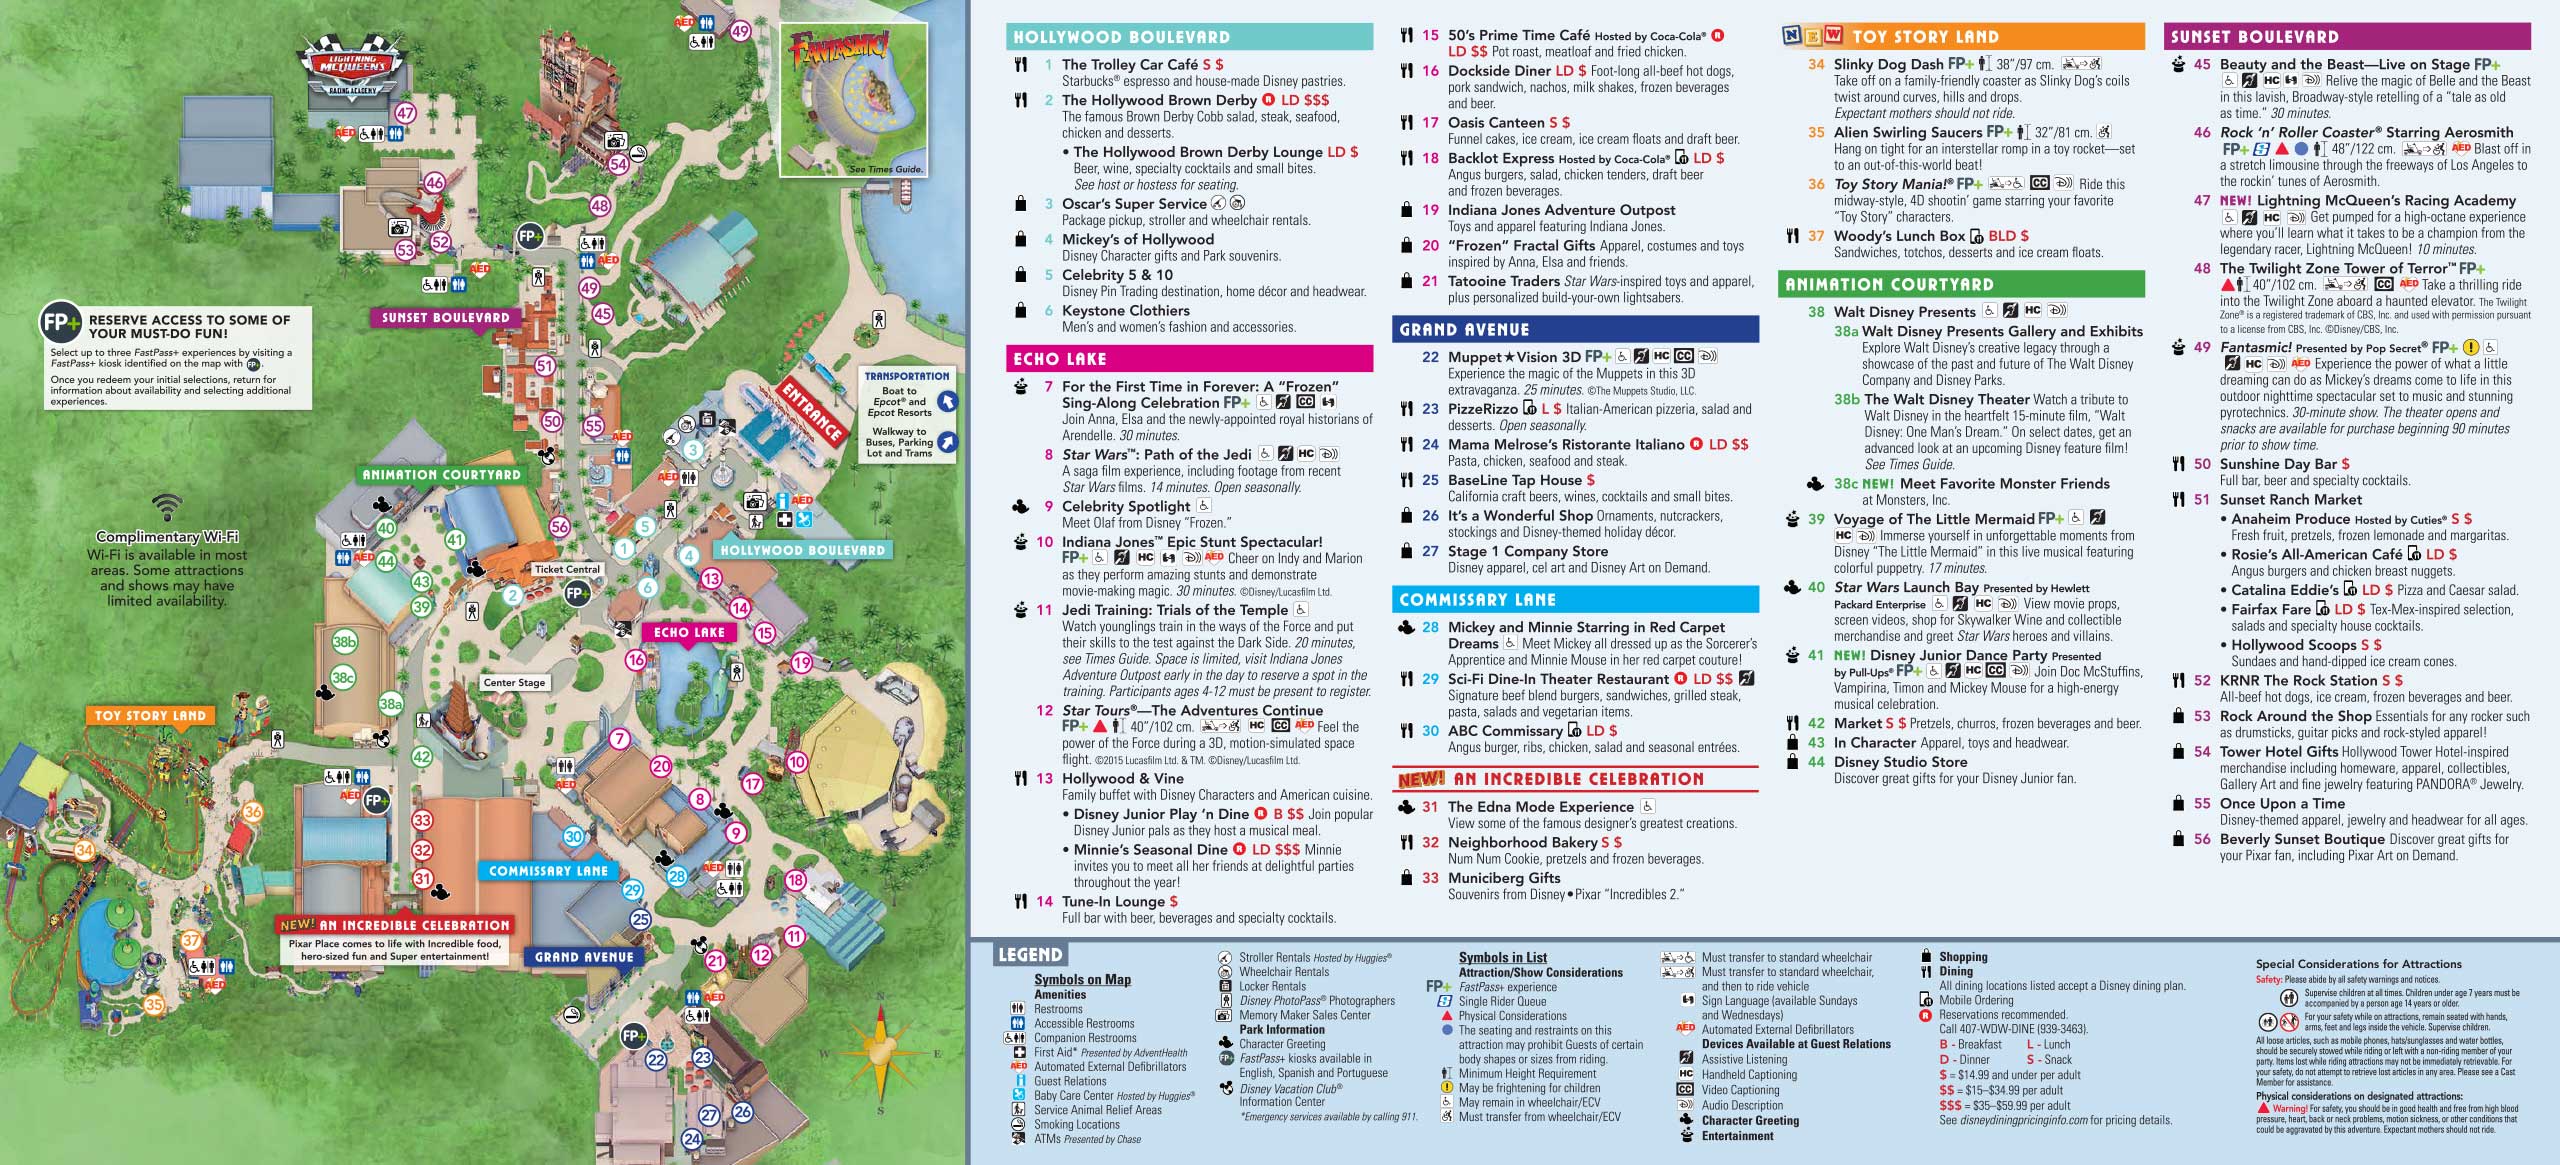 30th Anniversary Guide Map for Disney's Hollywood Studios Photo 2 of 3